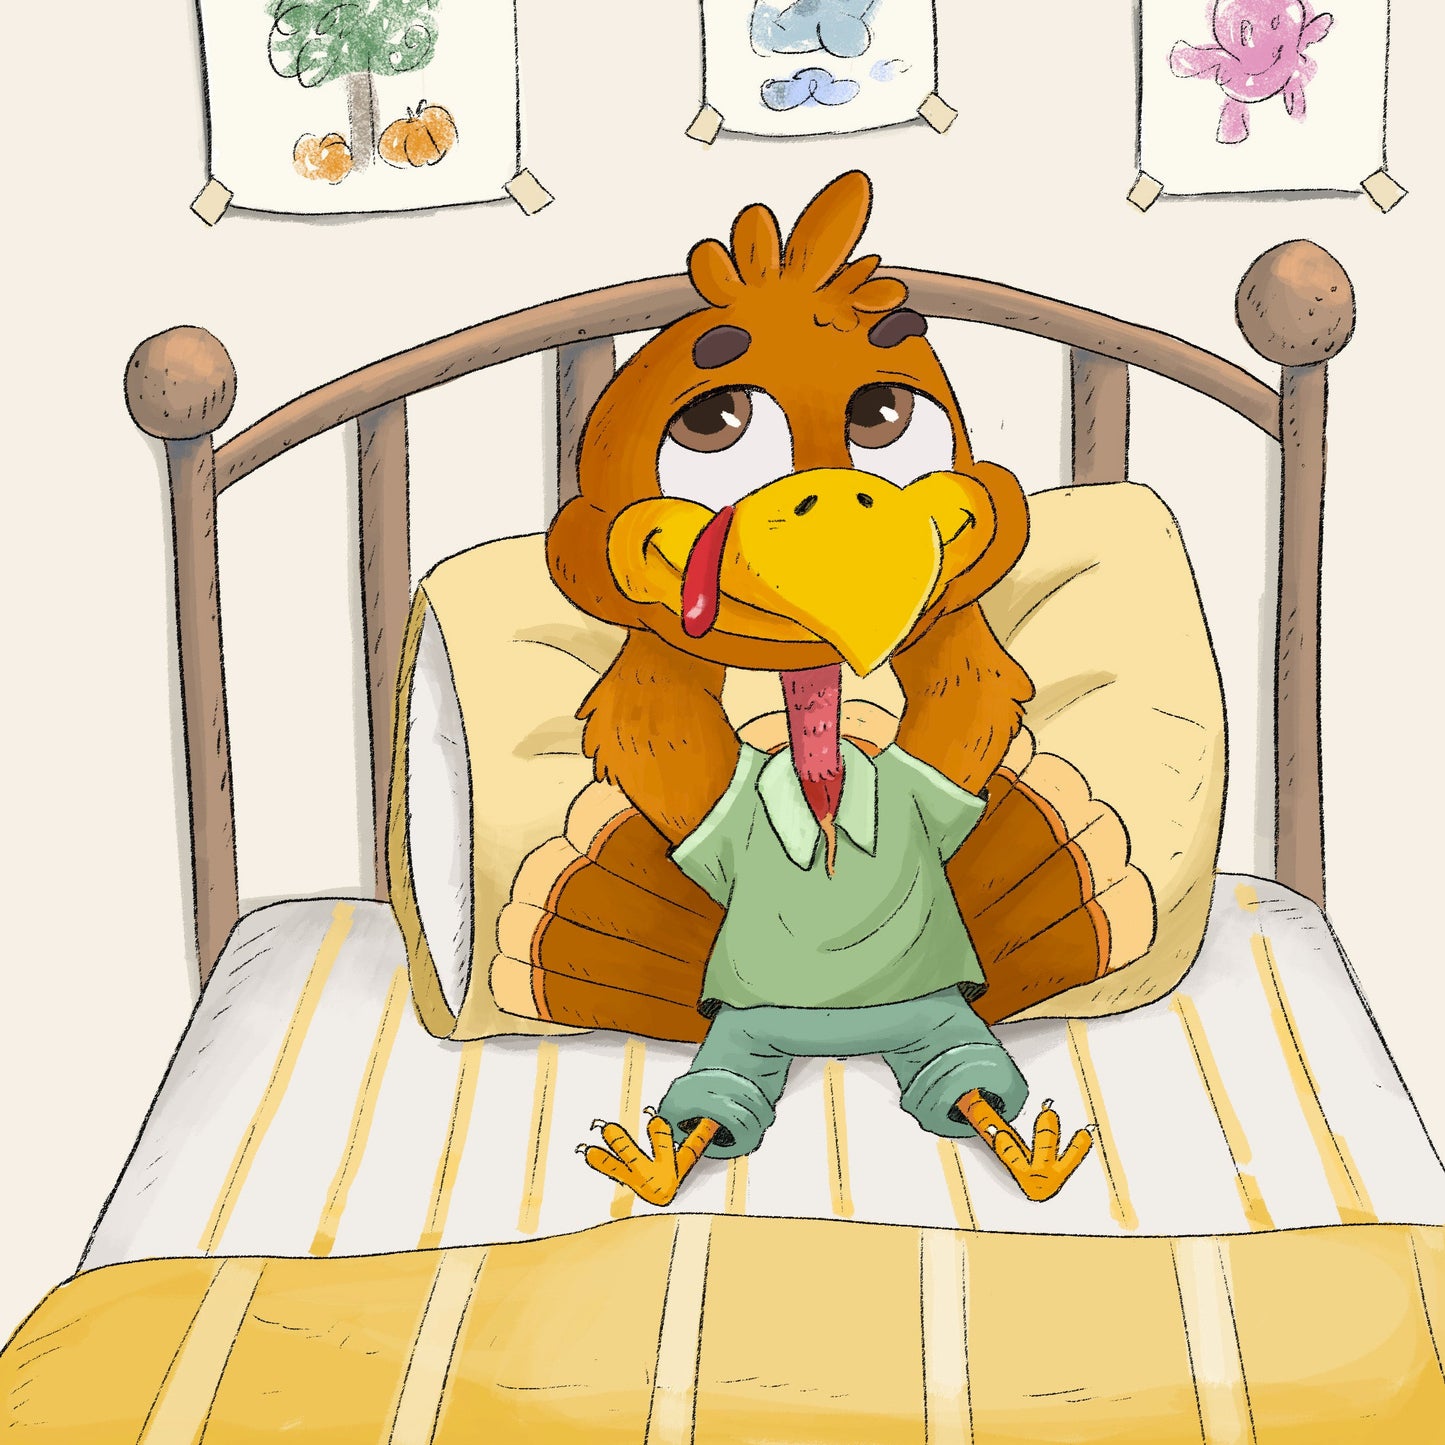 Taylor the Turkey's First Halloween: A Halloween Picture Book for Kids